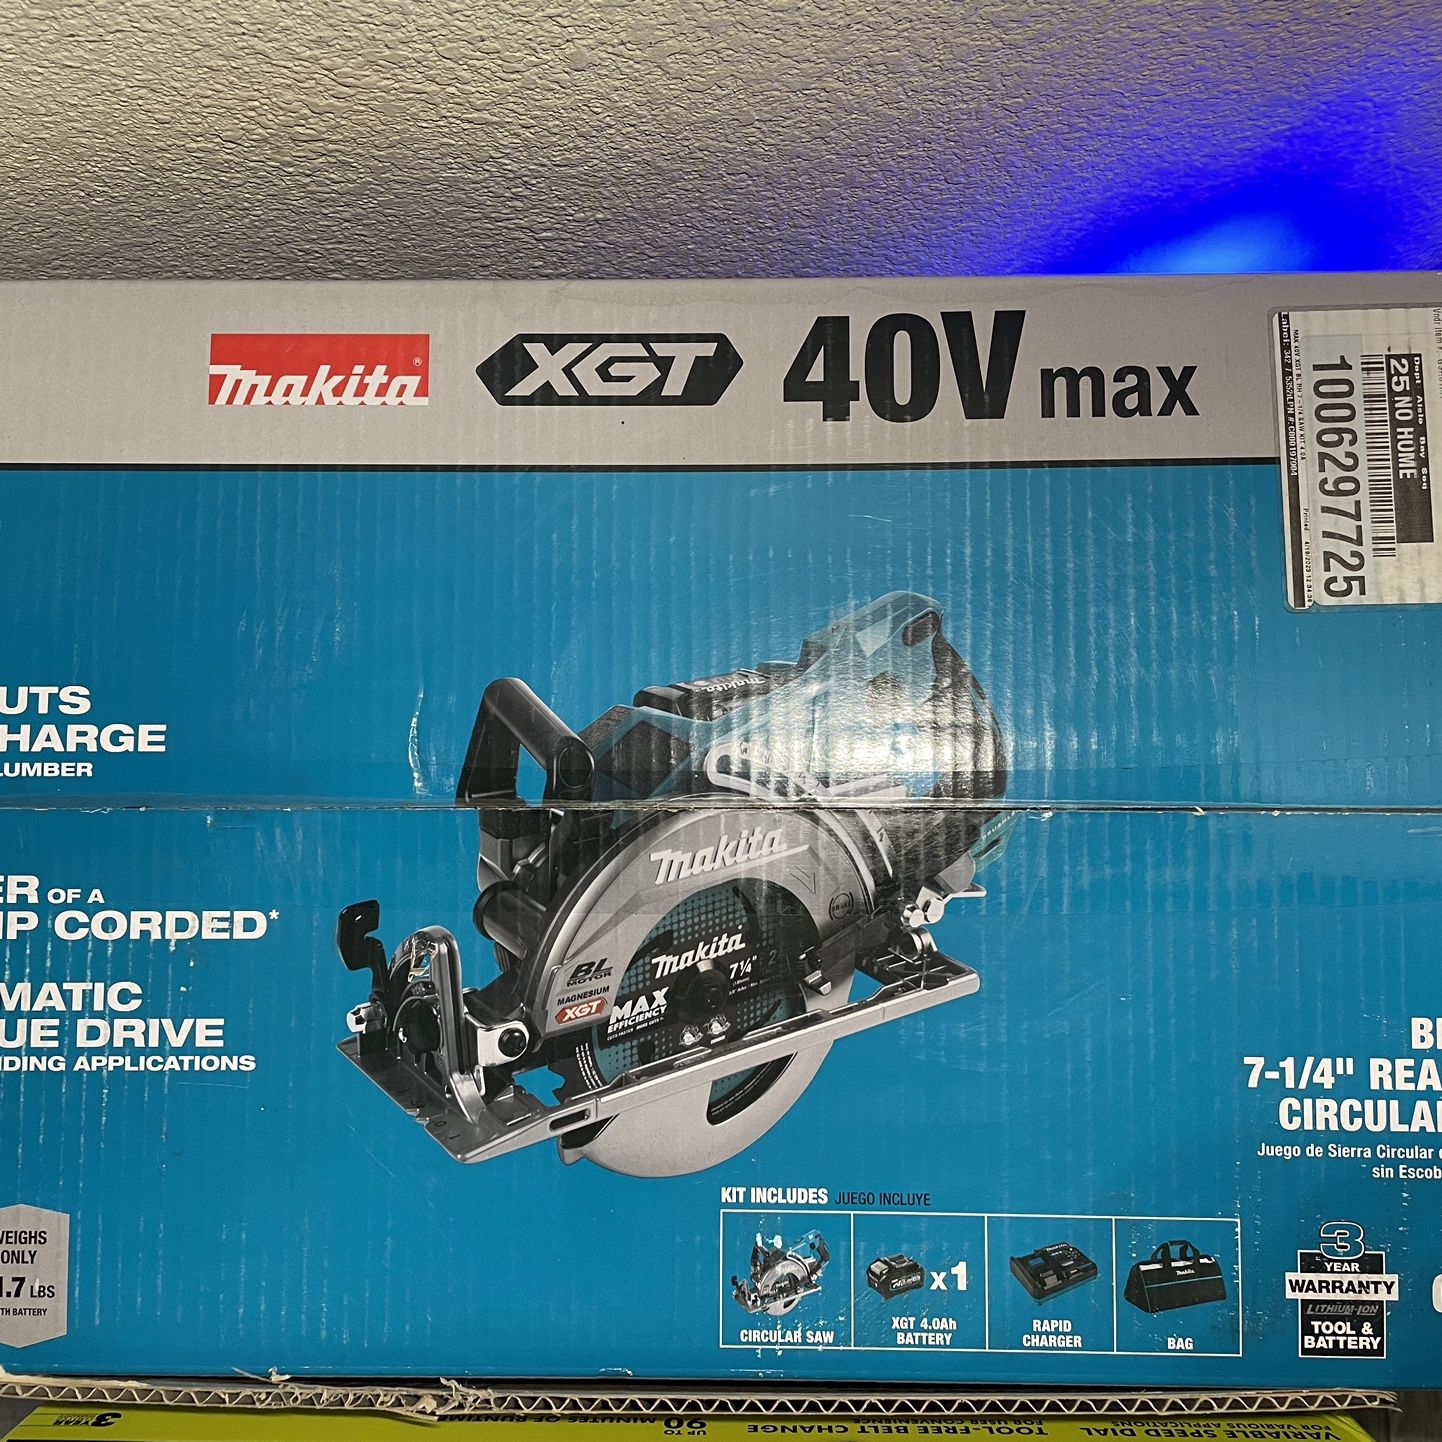 Makita 40v Max XGT Brushless Cordless Rear Handle 7-1/4” Circular Saw Kit  READ DESCRIPTION for Sale in San Diego, CA OfferUp